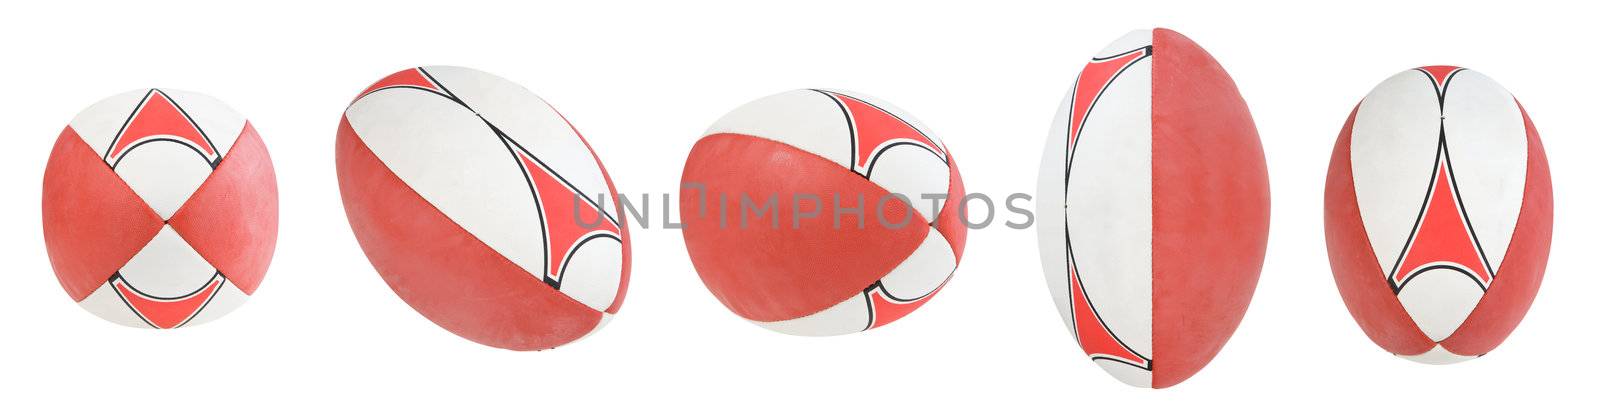 Football ball isolated on white. Clipping path